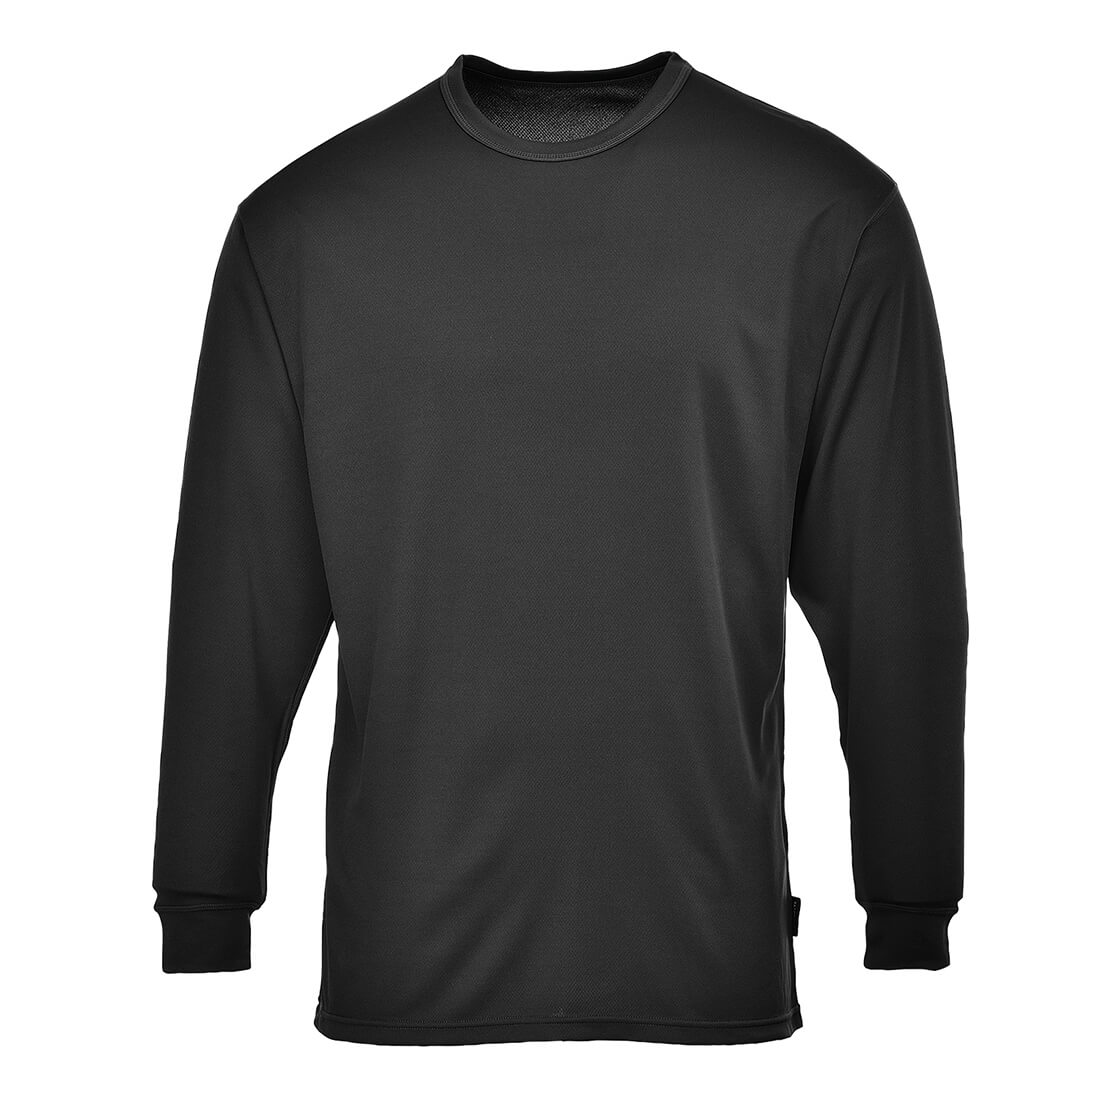 Photo of Base Layer Thermal Top Long Sleeve Black S